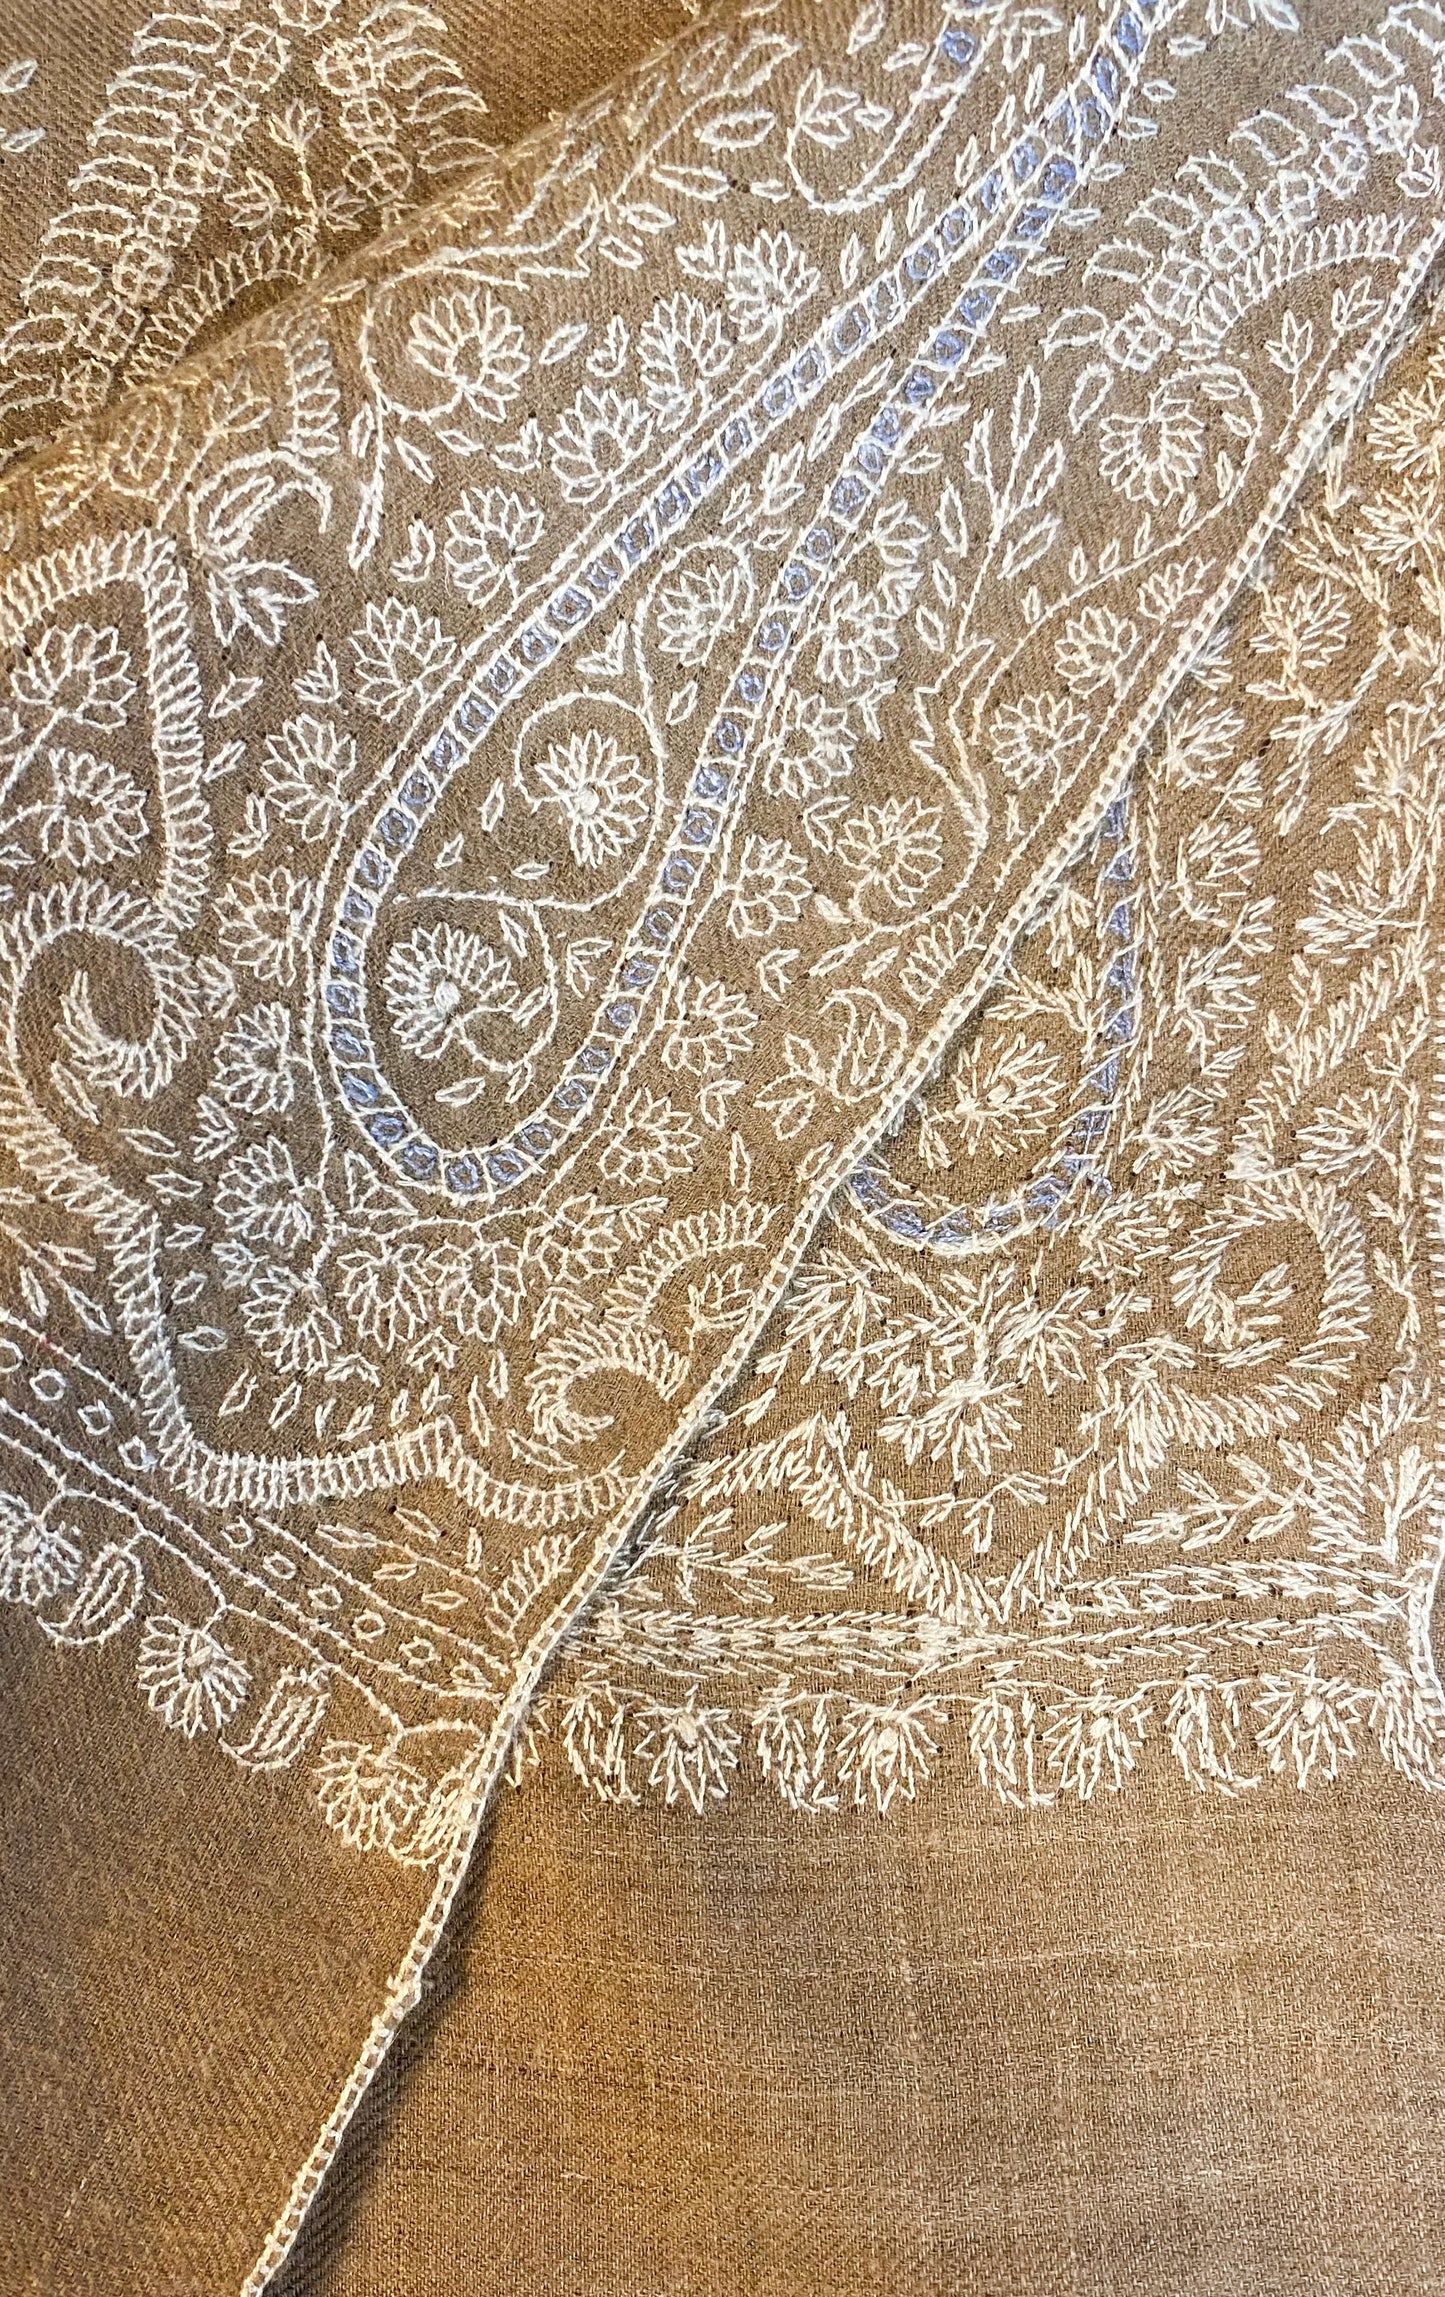 A luxurious beige pashmina shawl, handcrafted from 100% cashmere in Srinagar, India. Measuring 200x104 cm, it features intricate Sozni embroidery with patterns in white and light blue, adding sophistication and charm. This lightweight shawl, weighing 200 grams, offers warmth without bulk and is versatile for various styles, embodying heritage and elegance in wearable art.